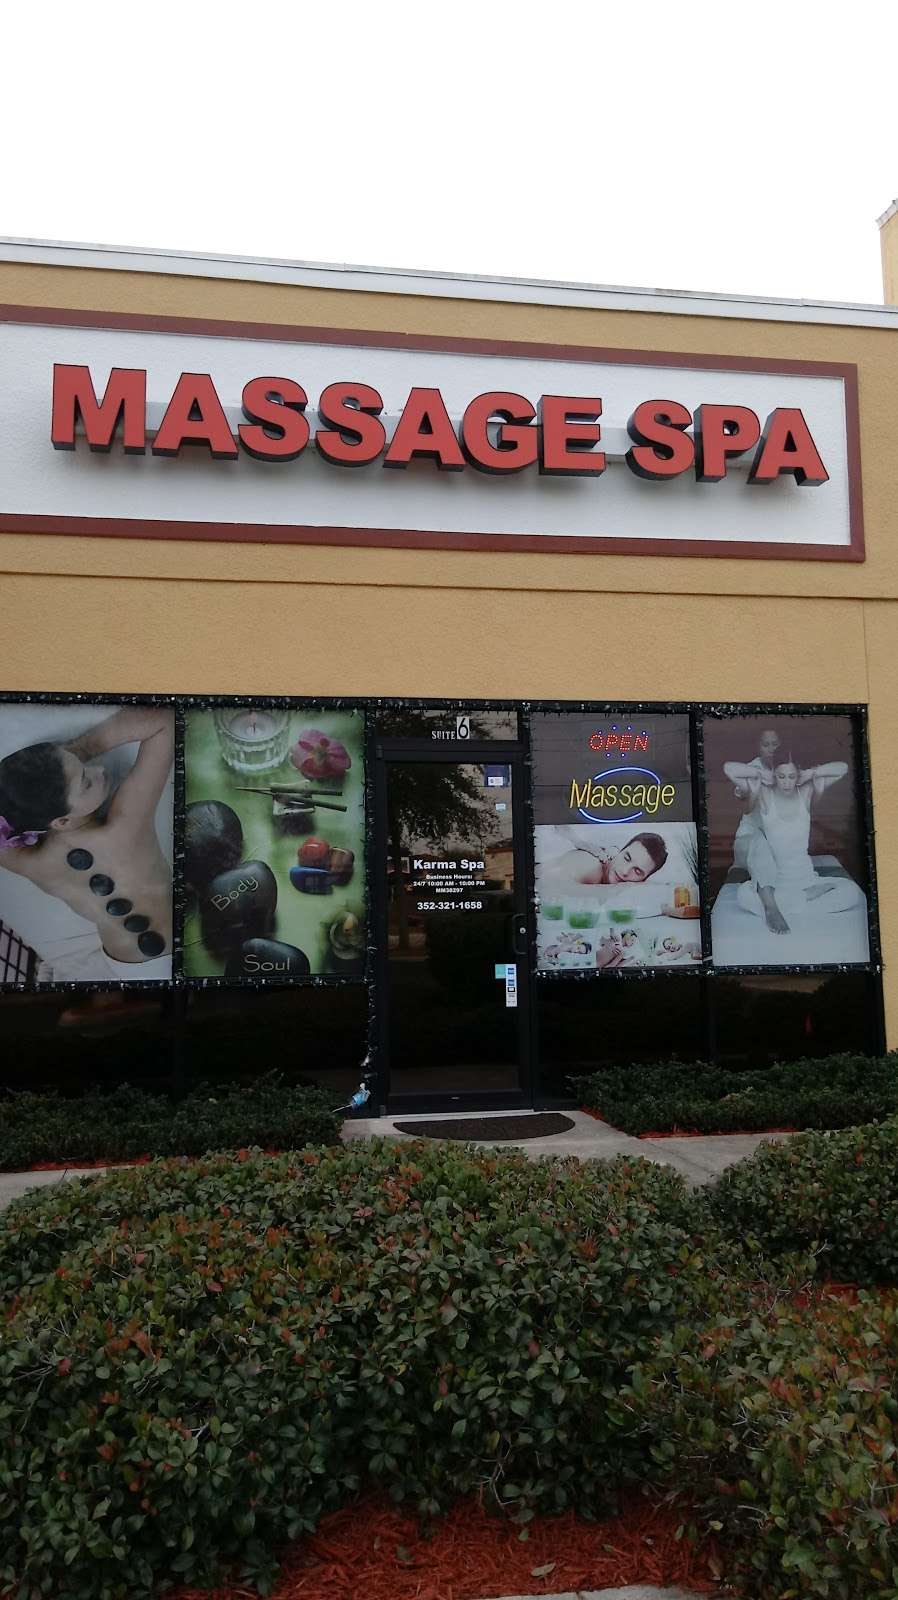 Karma Relaxation Spa | 4420 US-27, Clermont, FL 34711 | Phone: (352) 321-1658